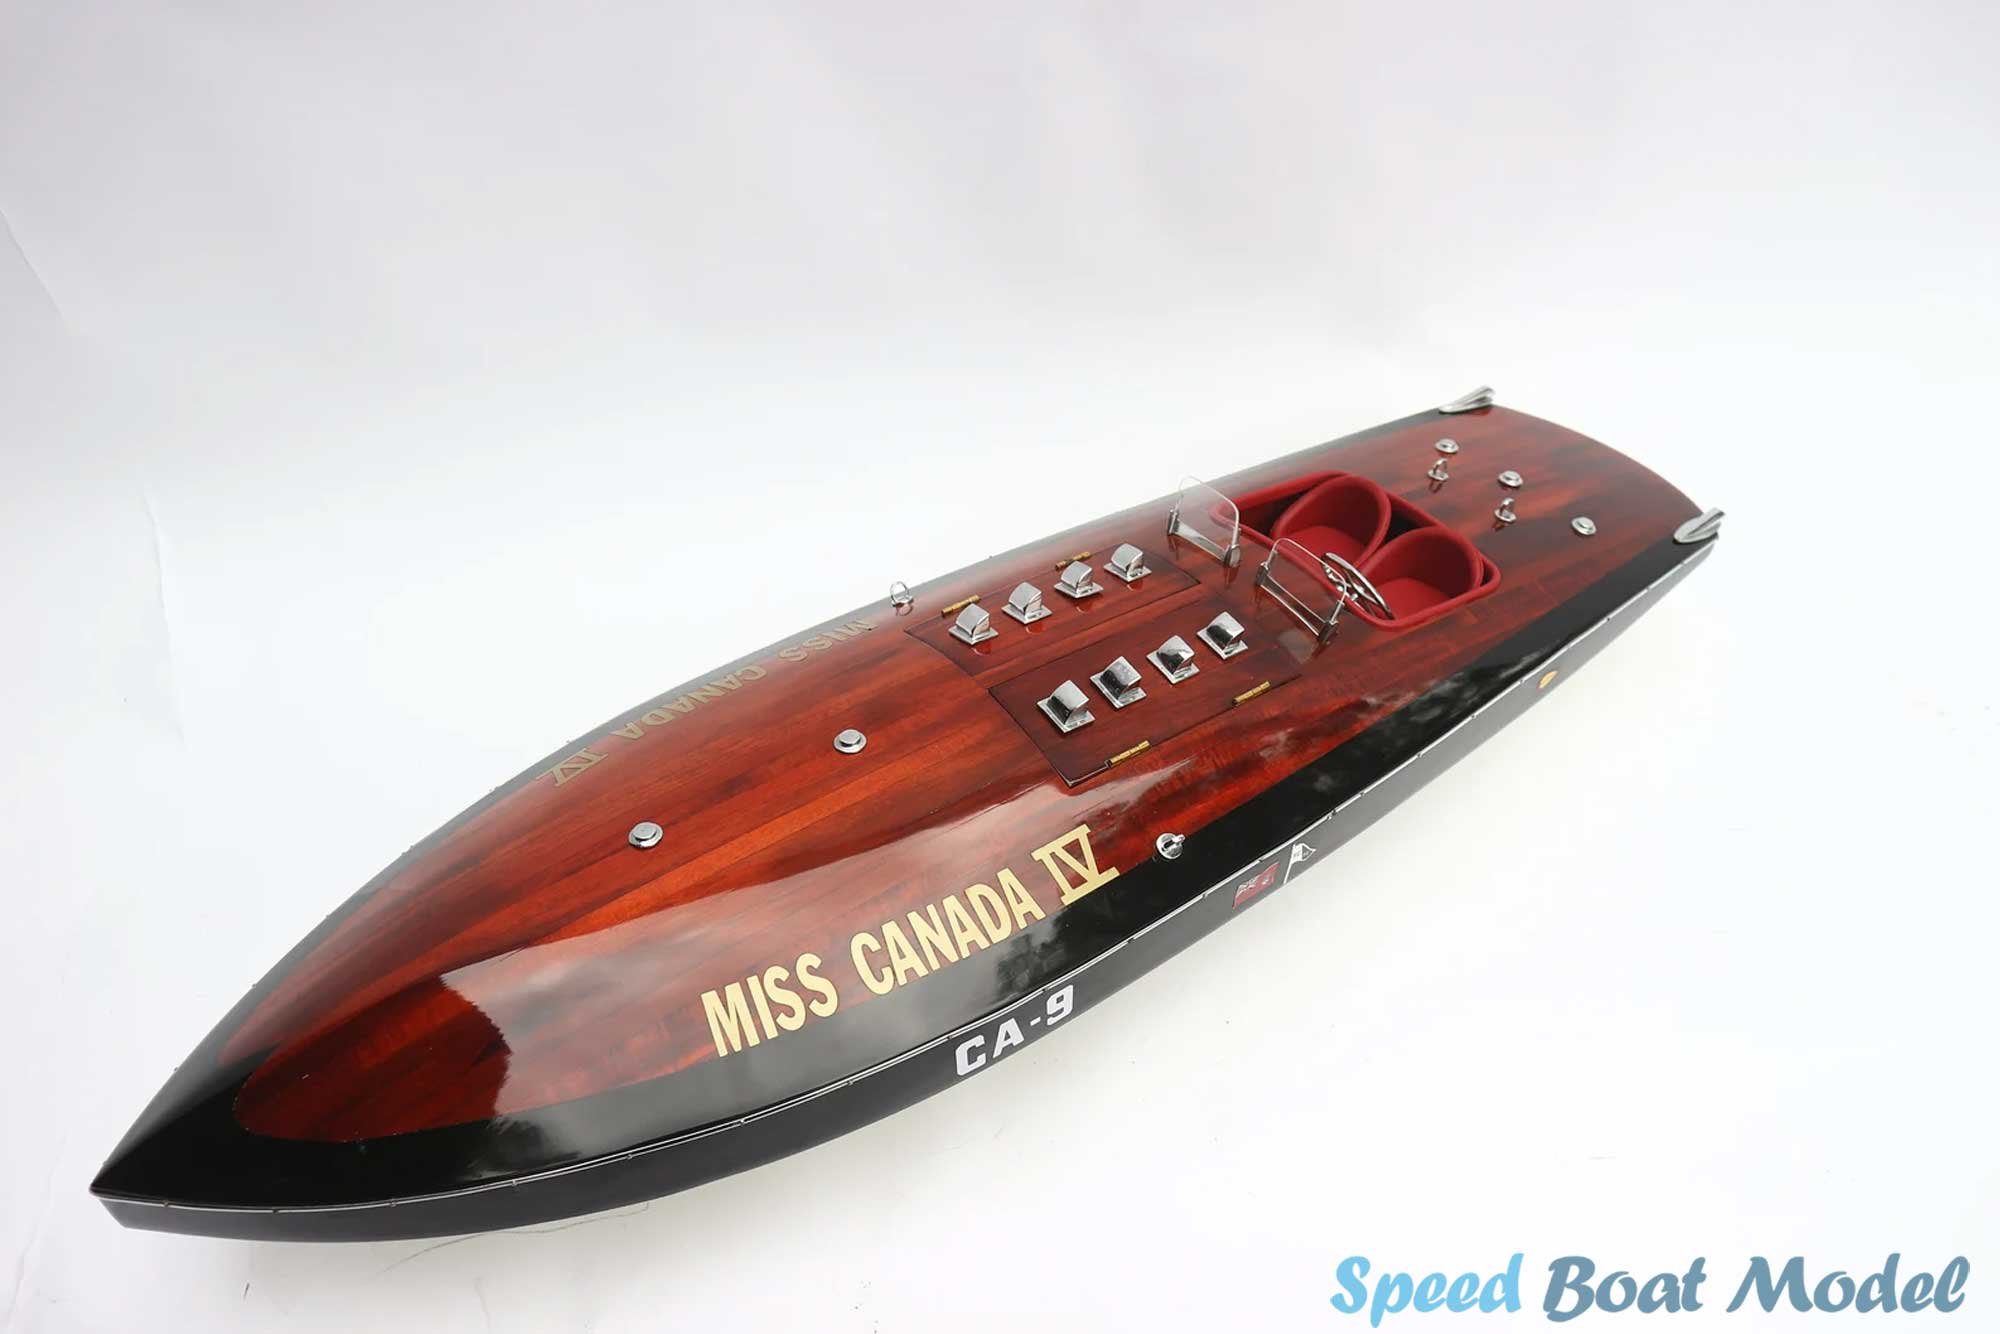 Miss Canda Iv Ca-9 Speed Boat Model 34 Inches